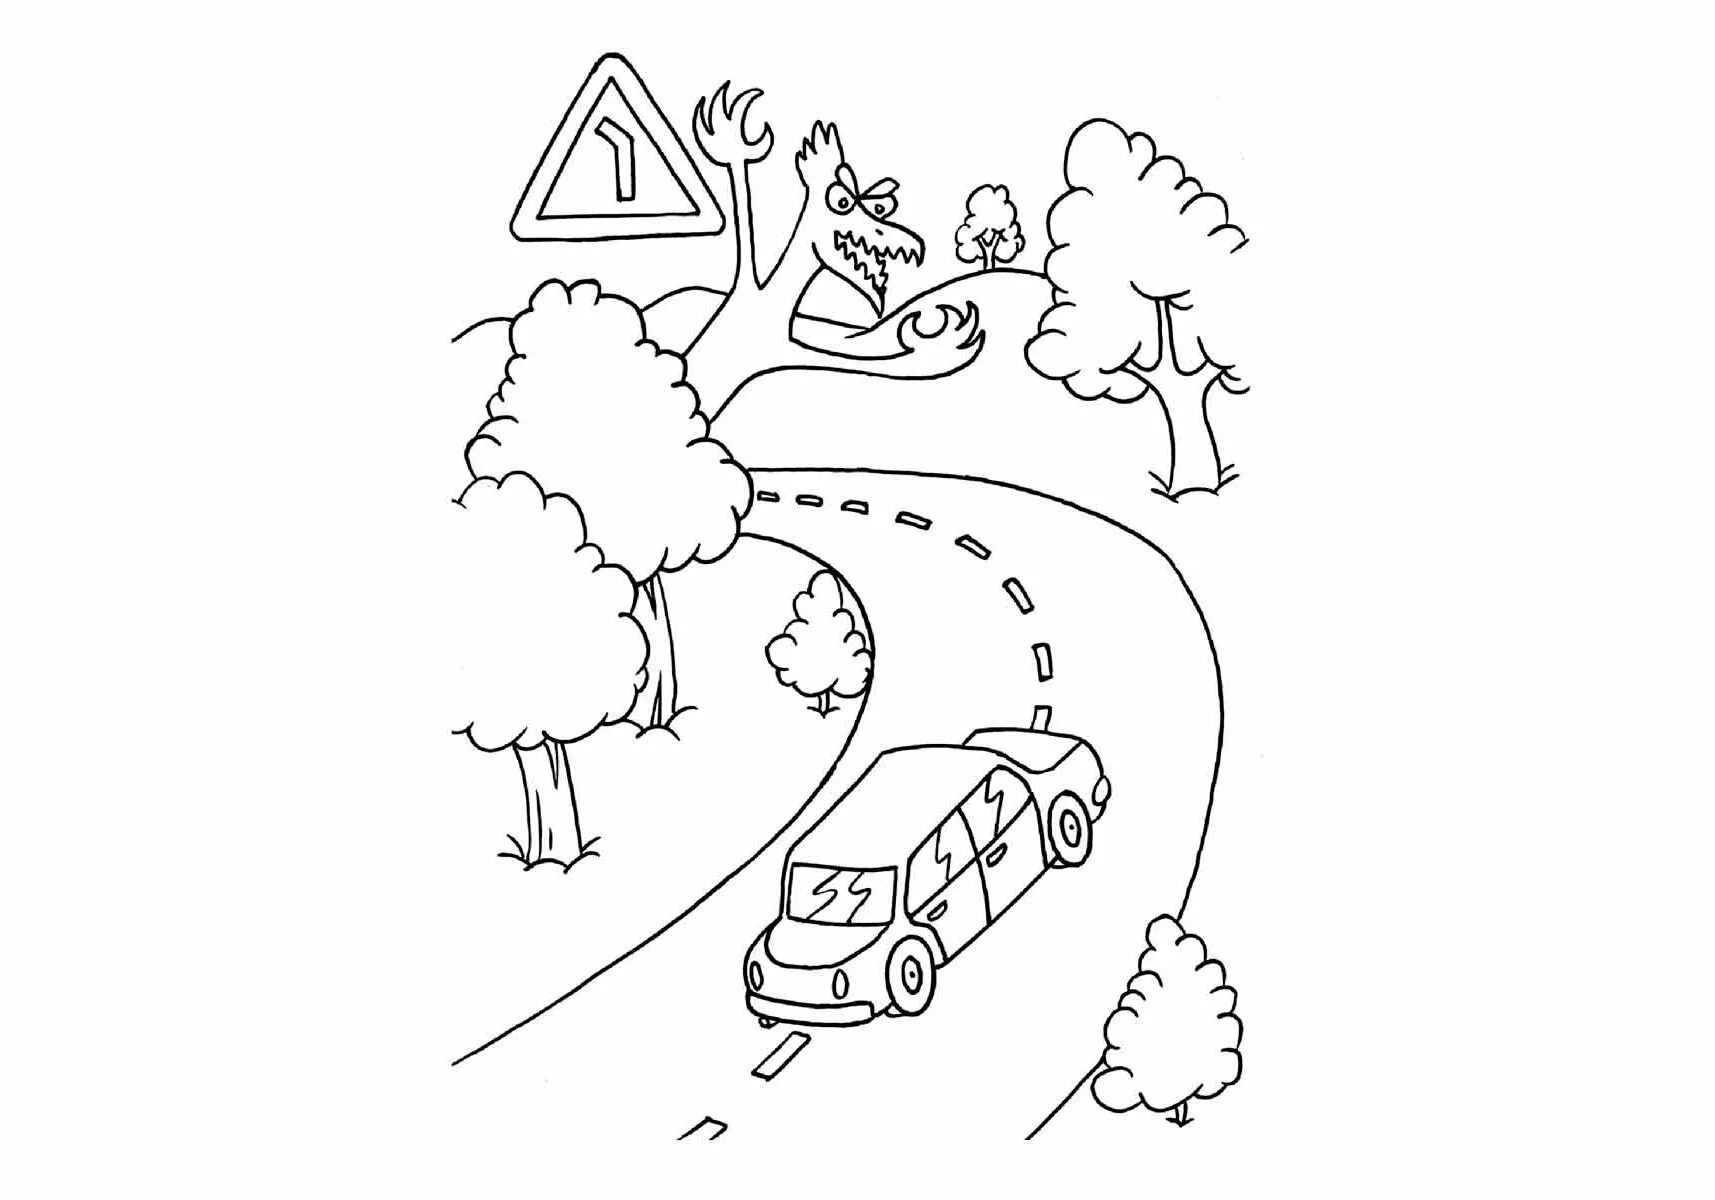 Coloring page magic winter road for kids